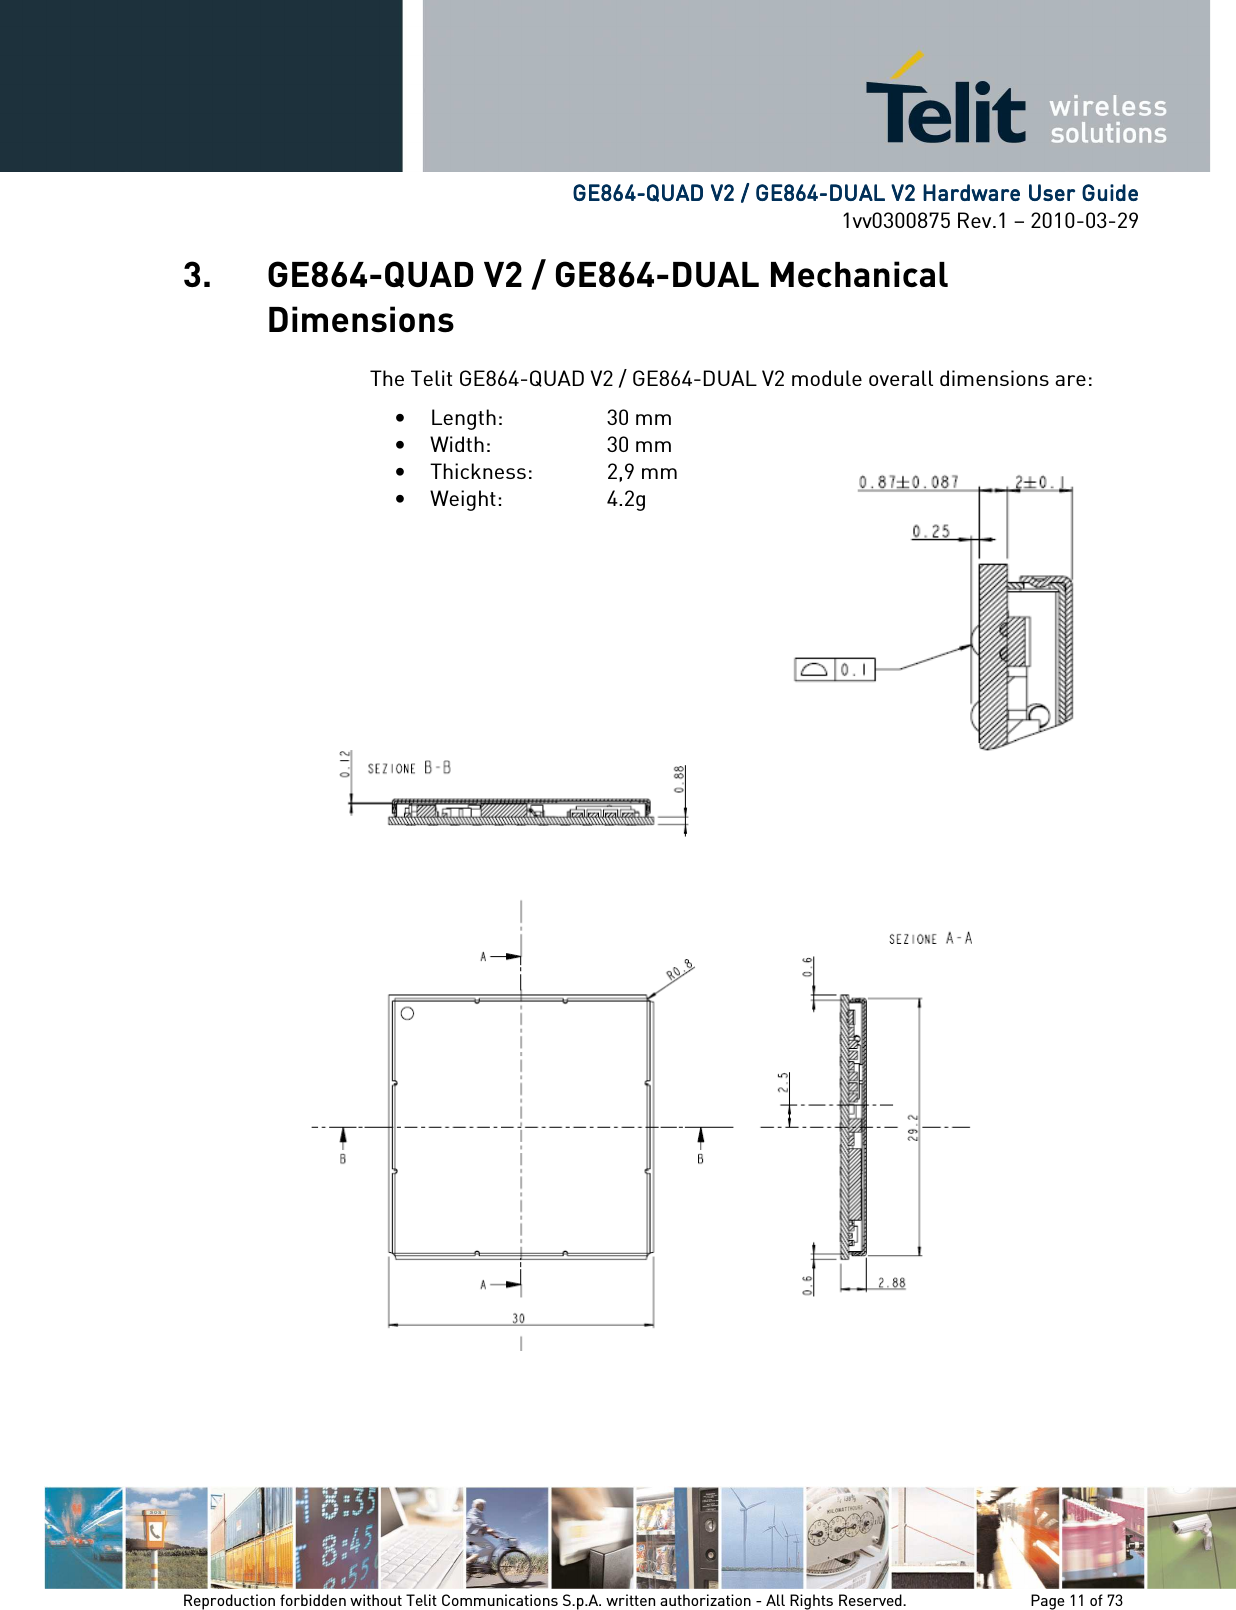            GE864GE864GE864GE864----QUAD V2 / GE864QUAD V2 / GE864QUAD V2 / GE864QUAD V2 / GE864----DUAL V2 Hardware User GuideDUAL V2 Hardware User GuideDUAL V2 Hardware User GuideDUAL V2 Hardware User Guide    1vv0300875 Rev.1 – 2010-03-29 Reproduction forbidden without Telit Communications S.p.A. written authorization - All Rights Reserved.    Page 11 of 73  3. GE864-QUAD V2 / GE864-DUAL Mechanical Dimensions The Telit GE864-QUAD V2 / GE864-DUAL V2 module overall dimensions are: • Length:    30 mm • Width:    30 mm • Thickness:   2,9 mm • Weight:     4.2g  